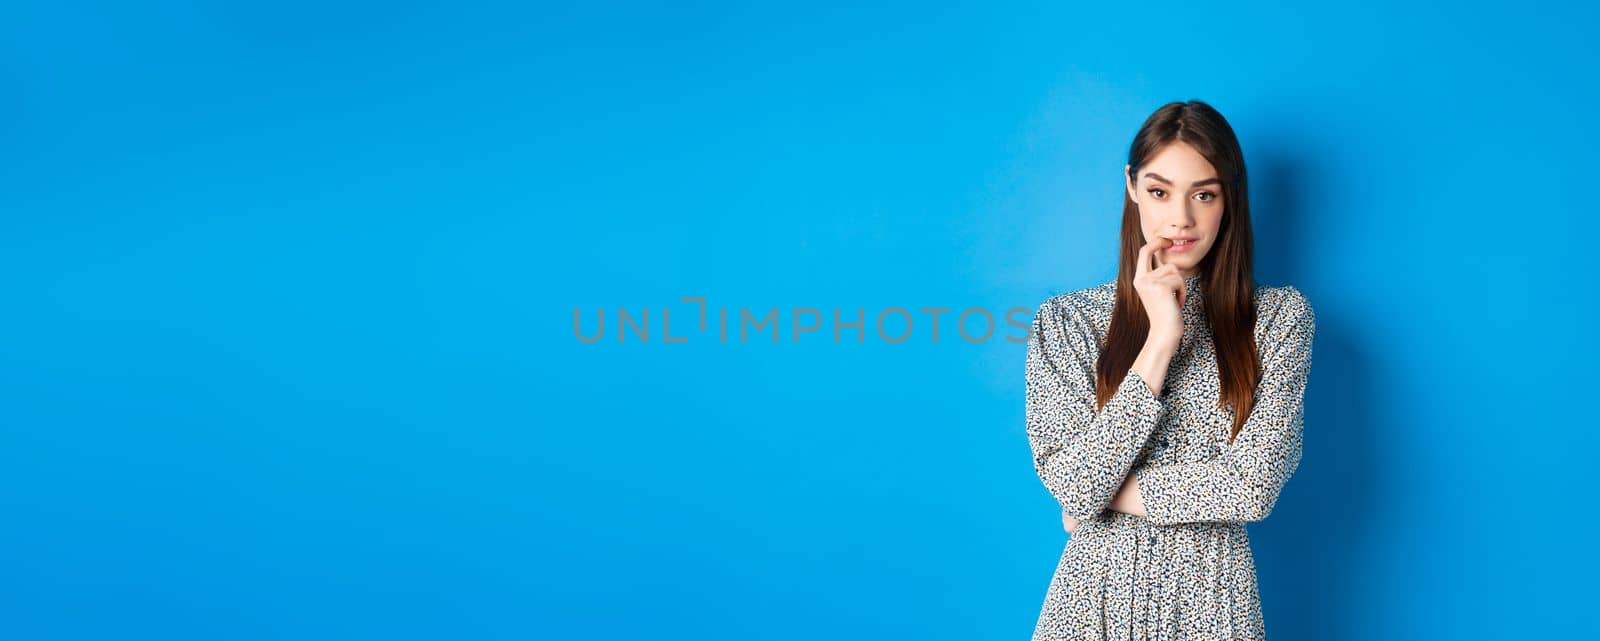 Sensual woman in dress biting finger and looking pensive at camera, standing dreamy against blue background.